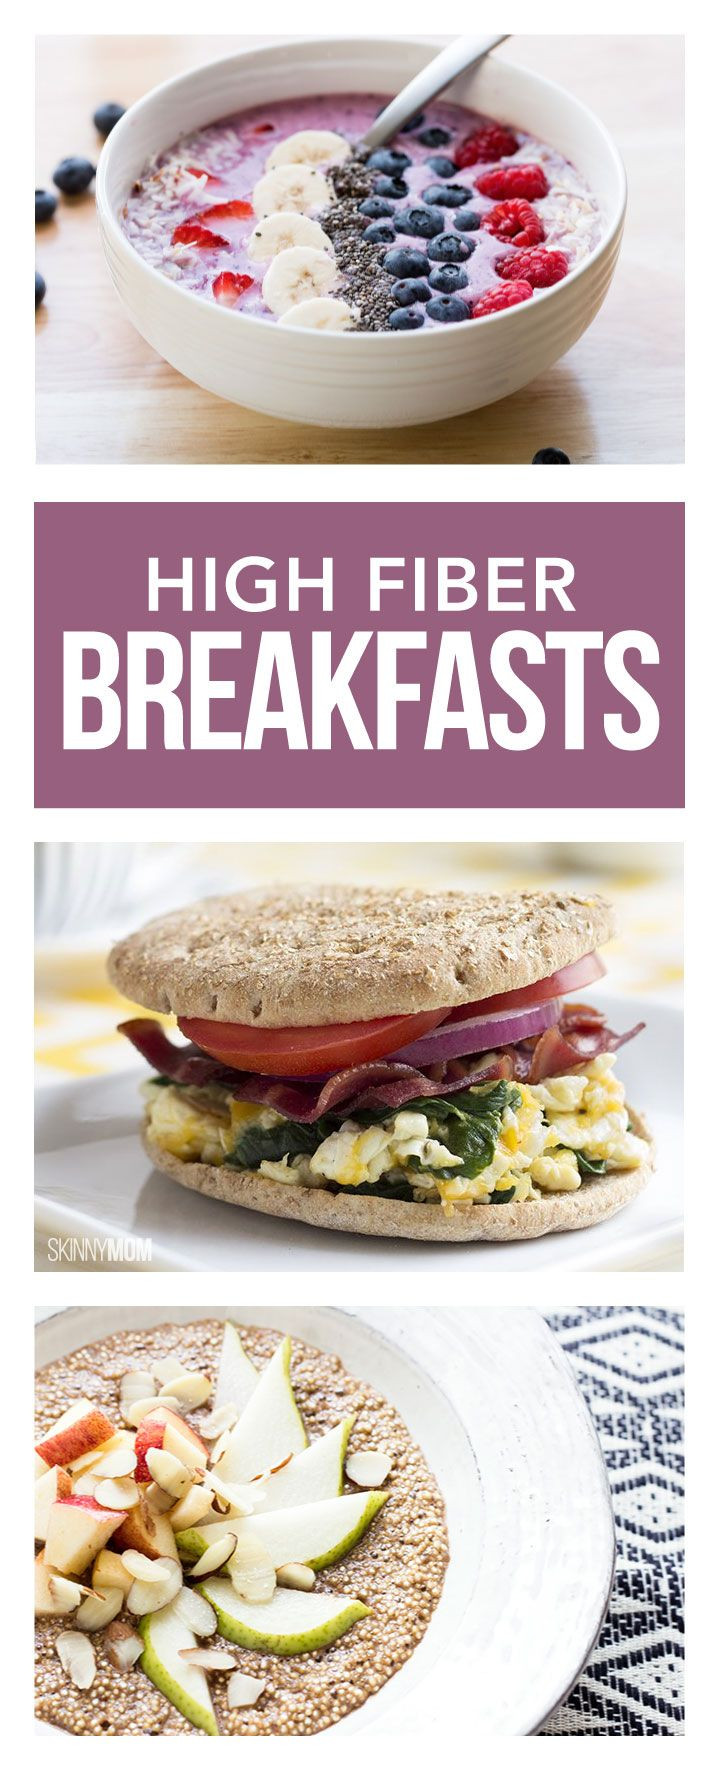 High Fiber Food Recipes
 7 High Fiber Breakfasts To Power You Through To Lunch